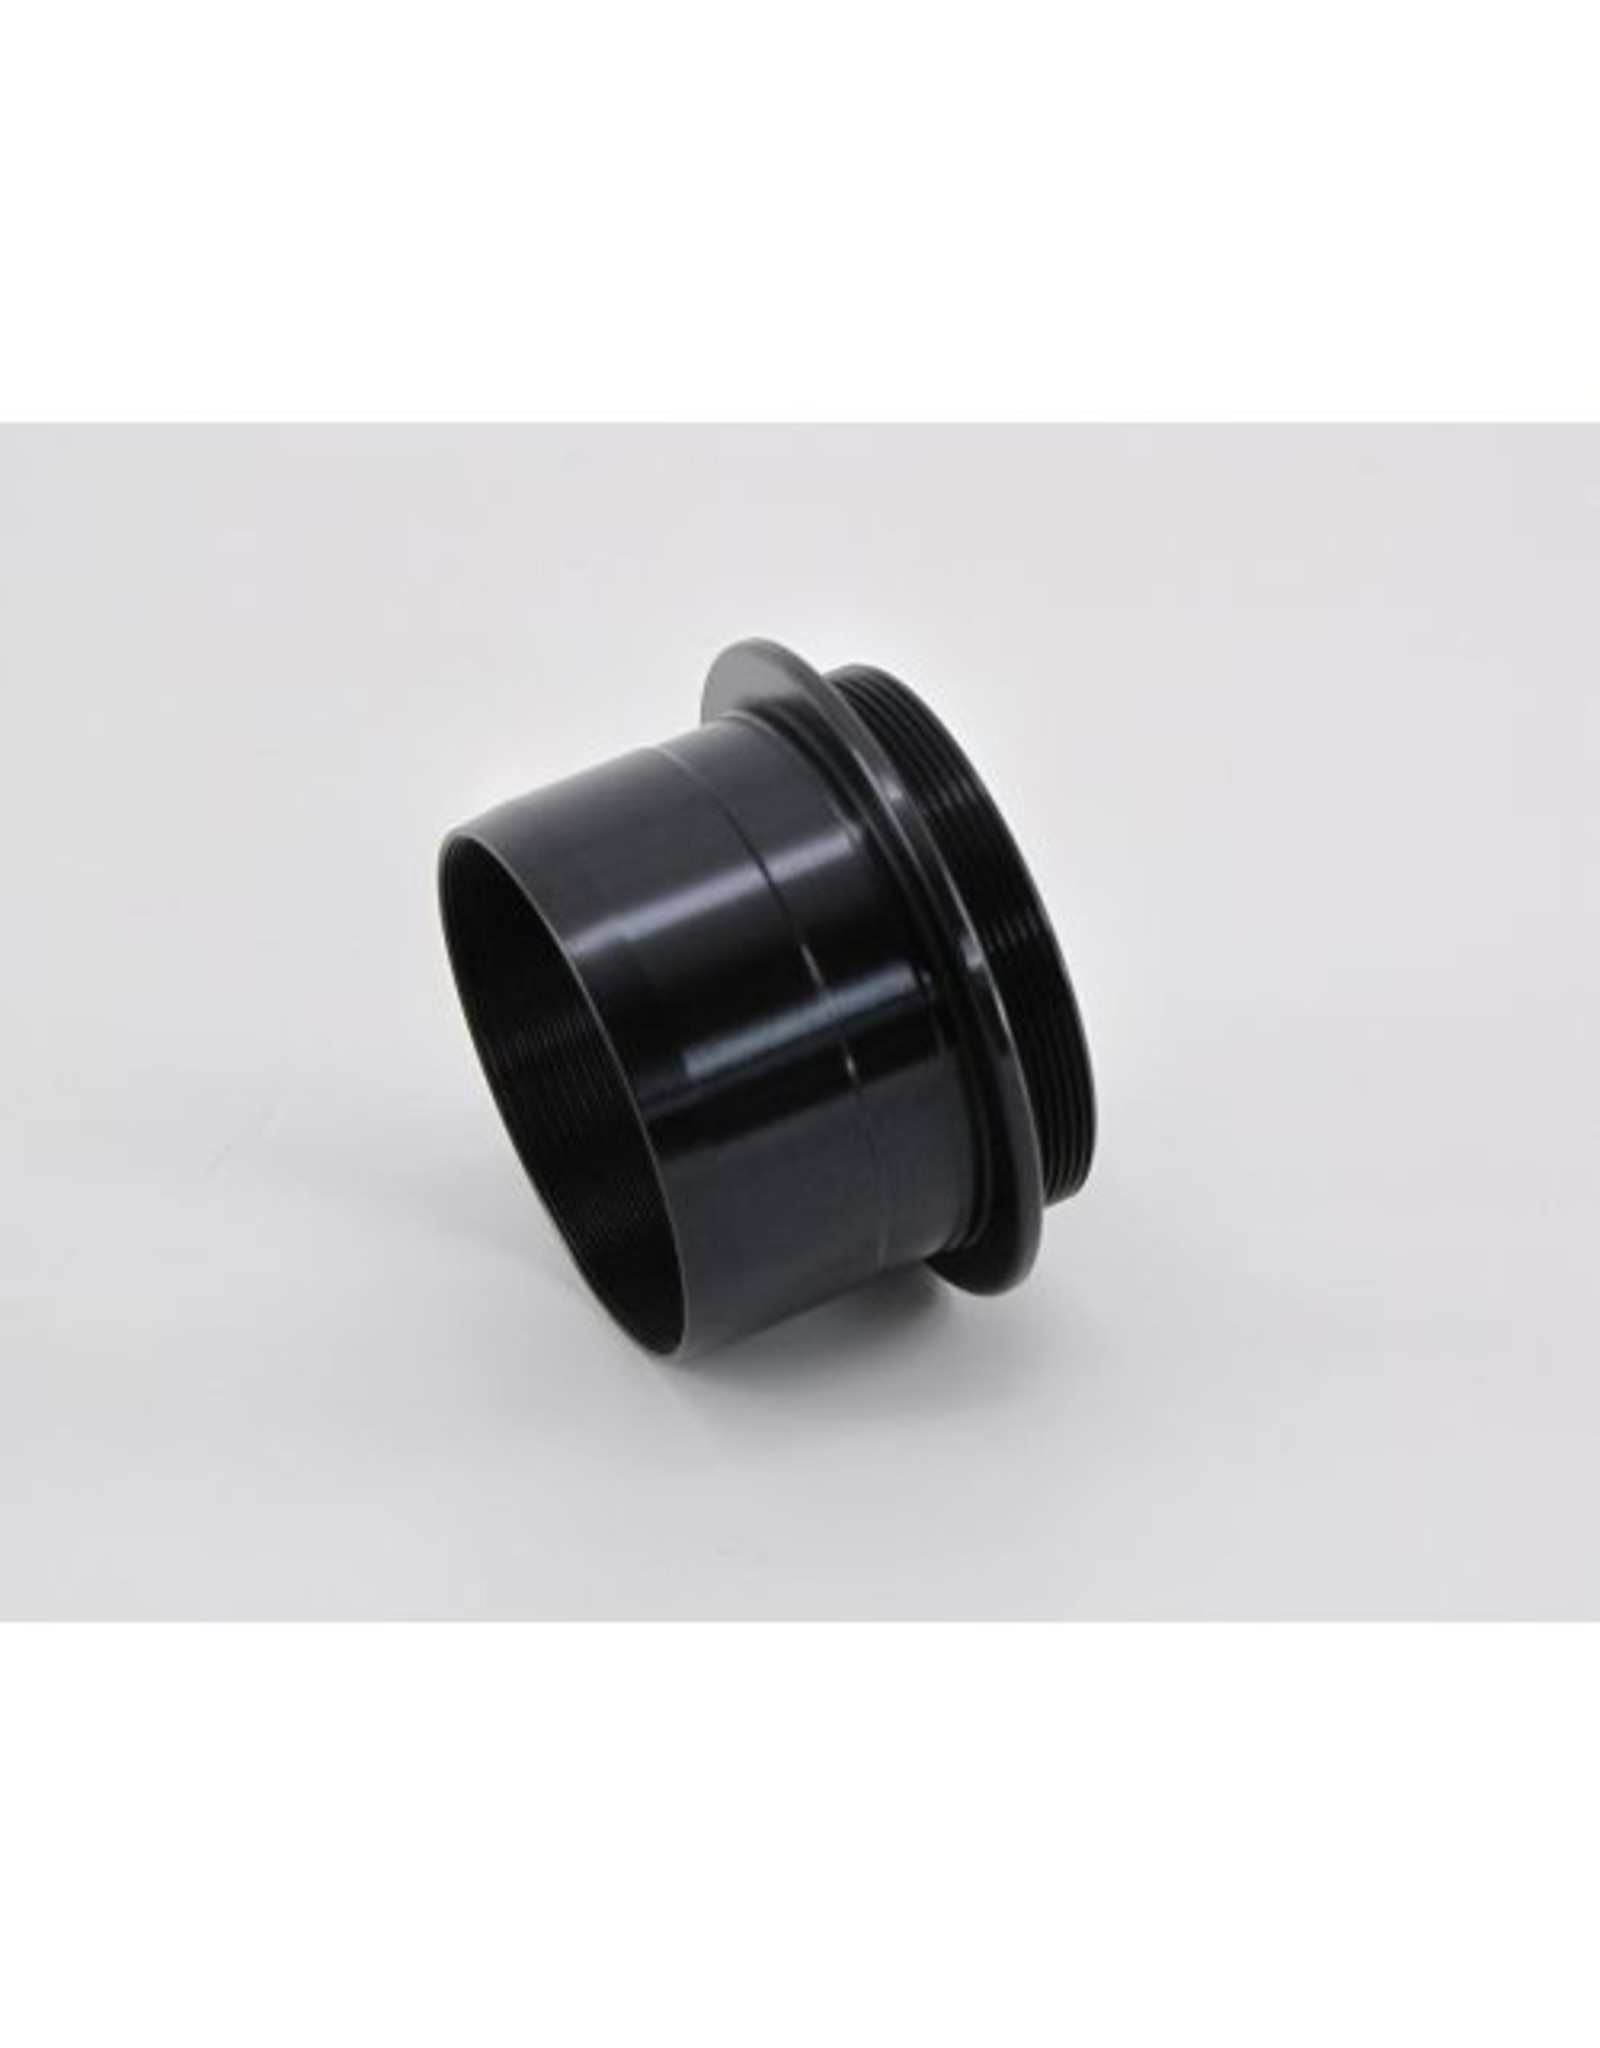 Feathertouch Feather Touch EA20-2.24---Eyepiece Adapter for Celestron/Meade 6.3 Focal Reducer